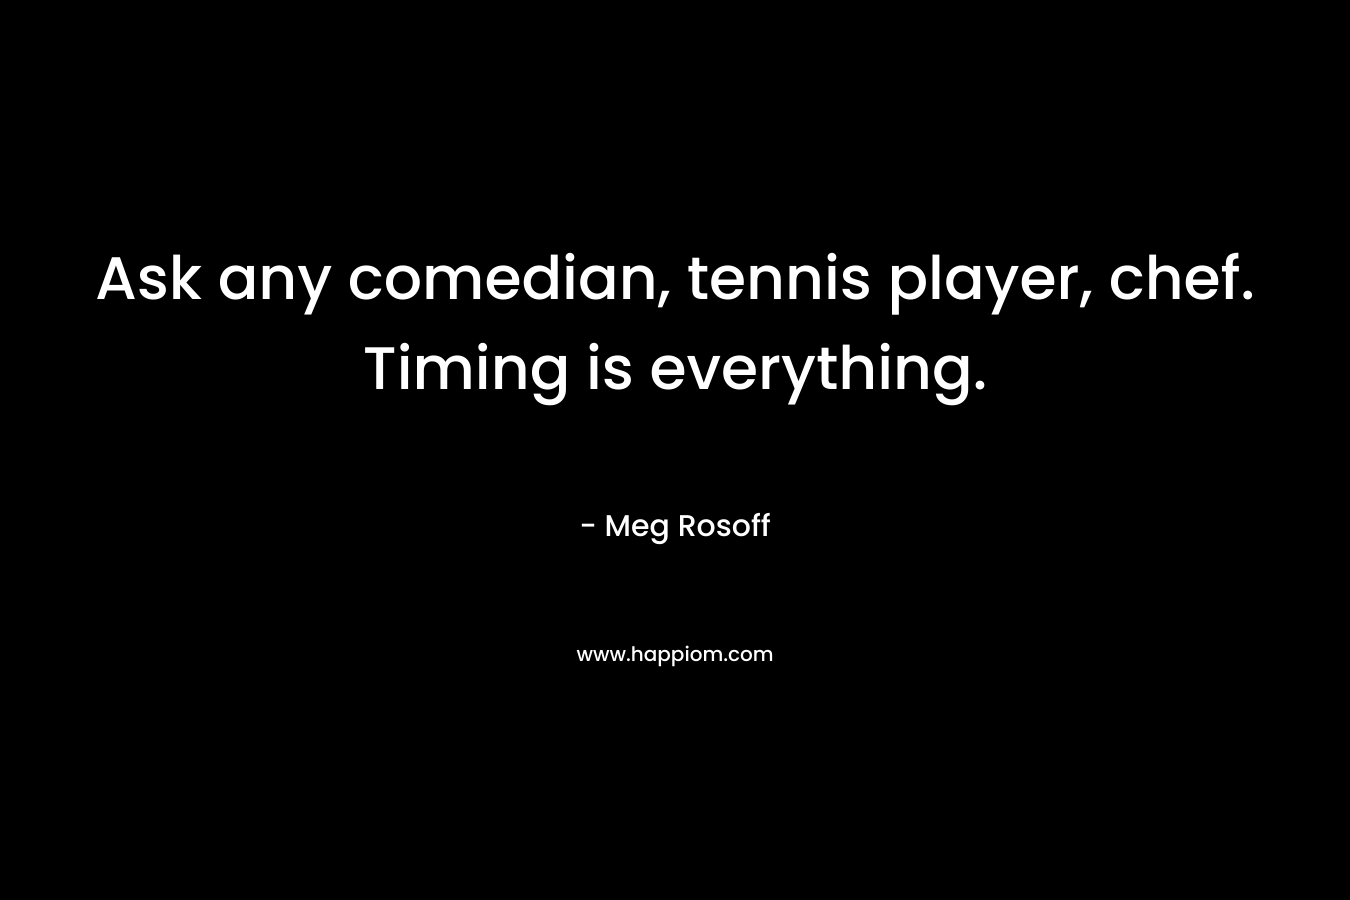 Ask any comedian, tennis player, chef. Timing is everything. – Meg Rosoff